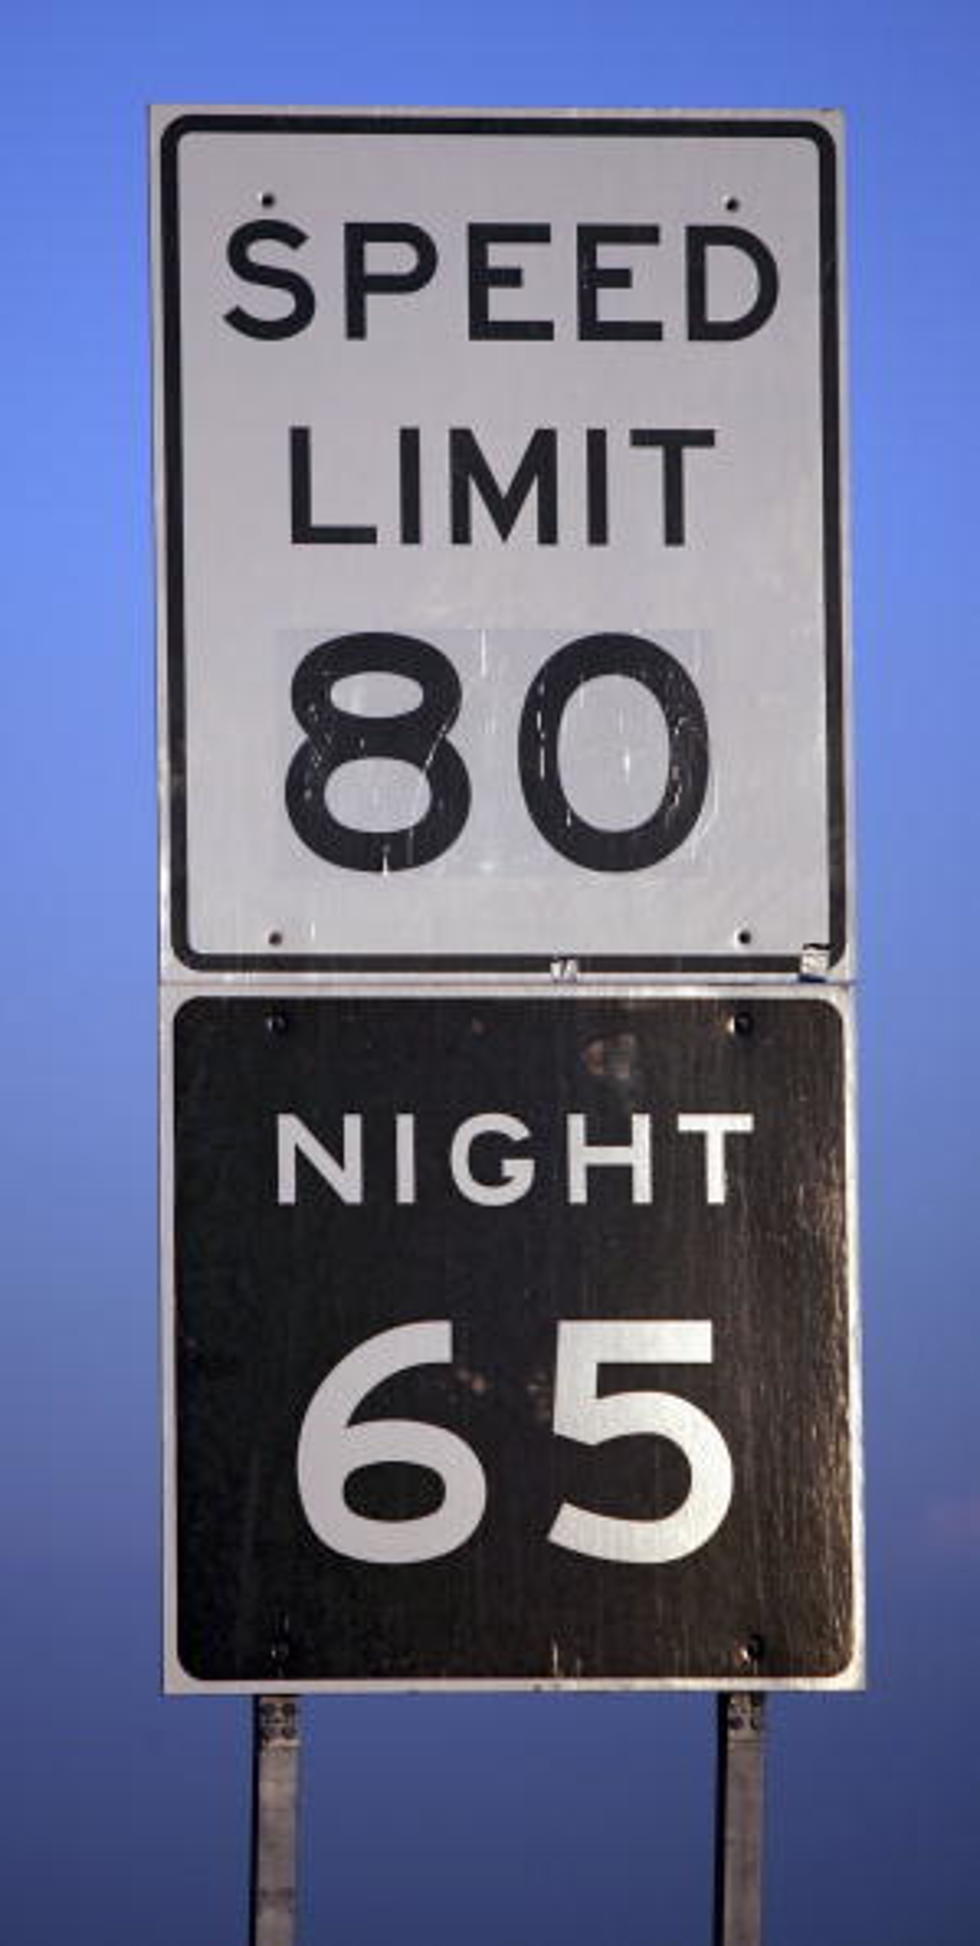 Texas Looks To Set Speed Limit to 85mph